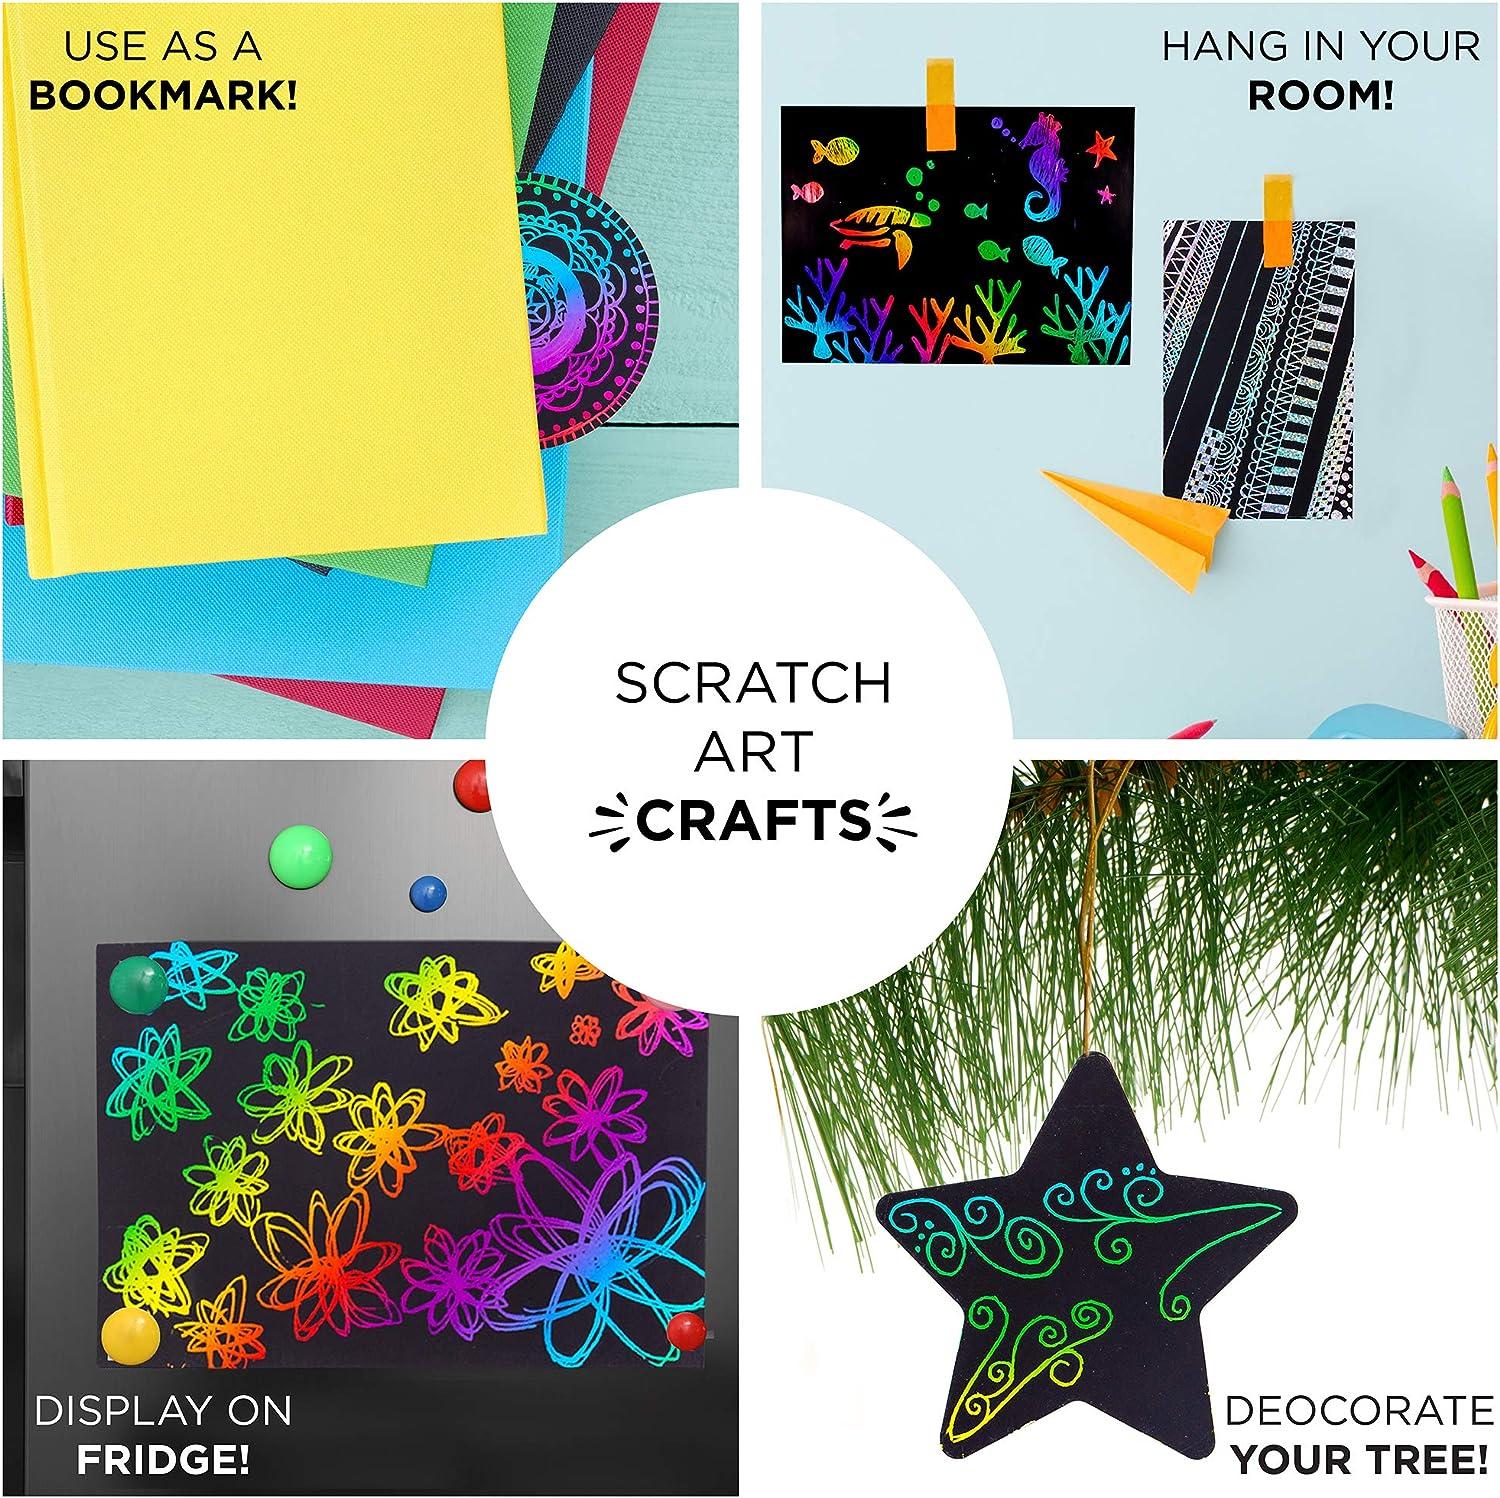 Holographic Scratch Art Pads